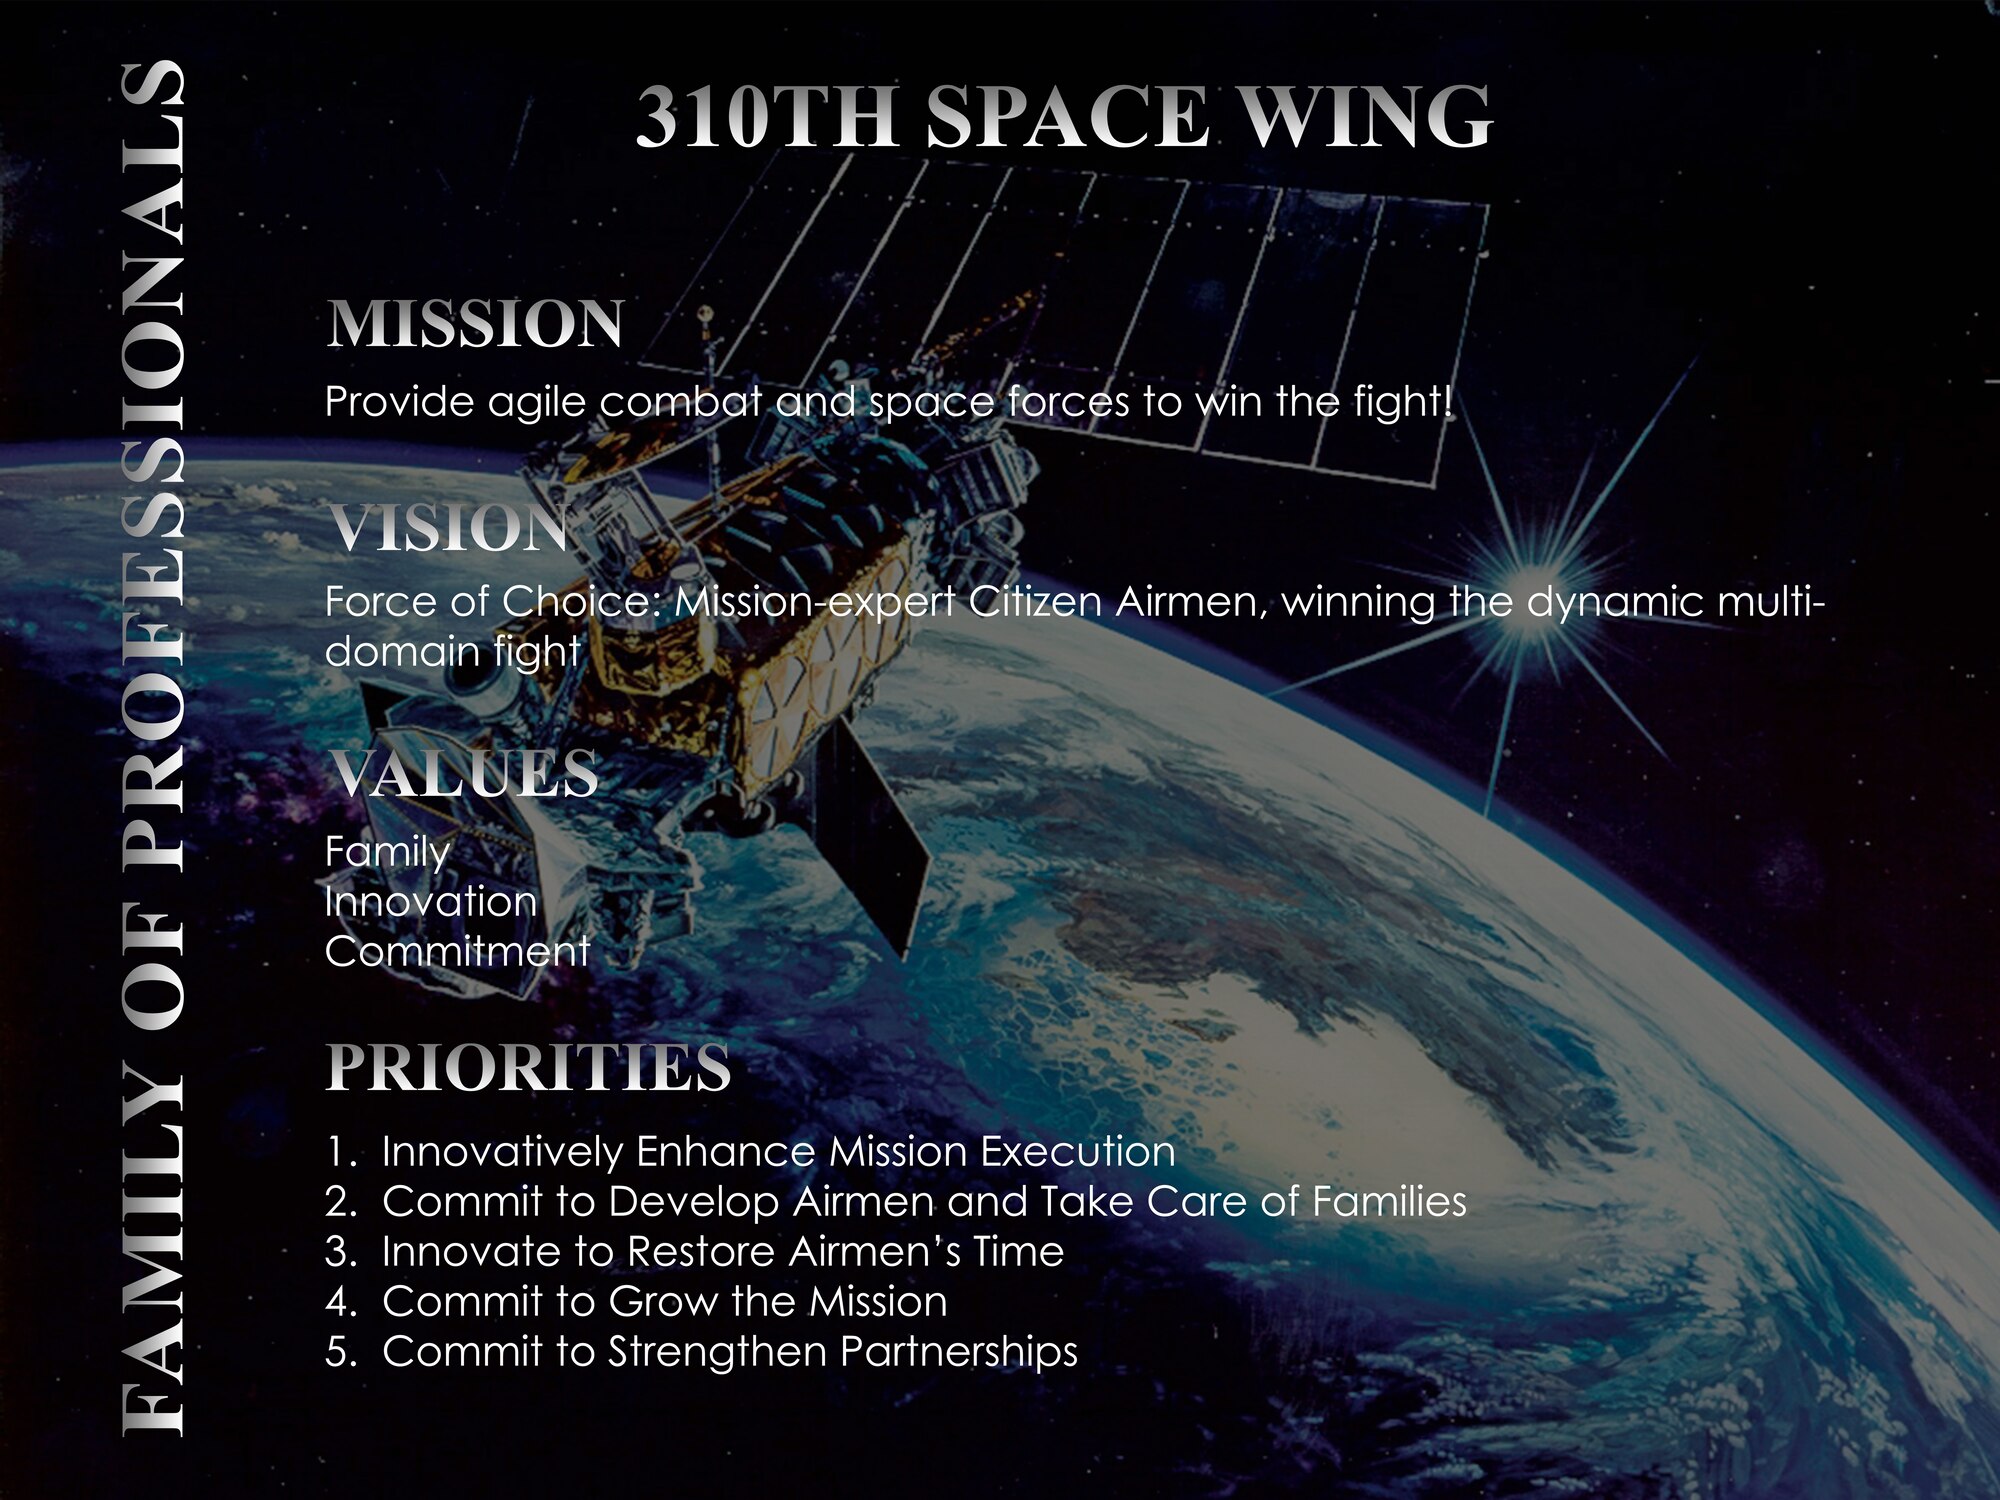 The 310th Space Wing outlines it's 2018-19 priorities shown in this strategic plan graphic Jan. 5, 2018.